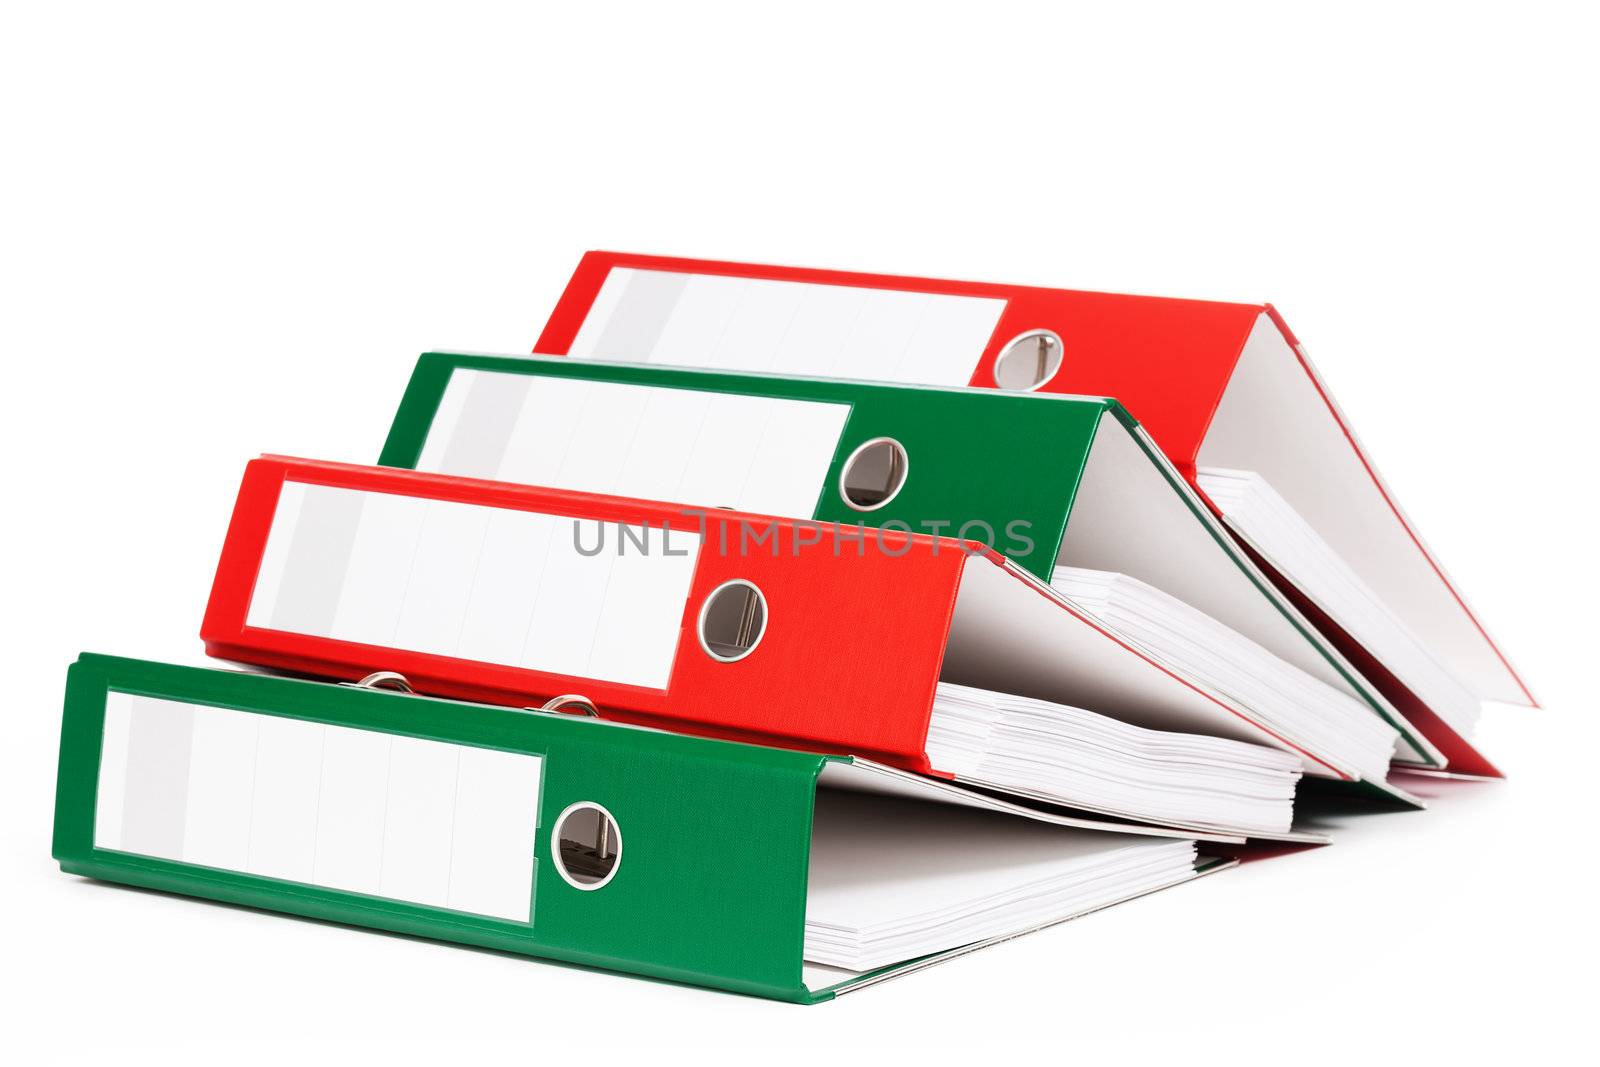 lying red and green ring binders on white background